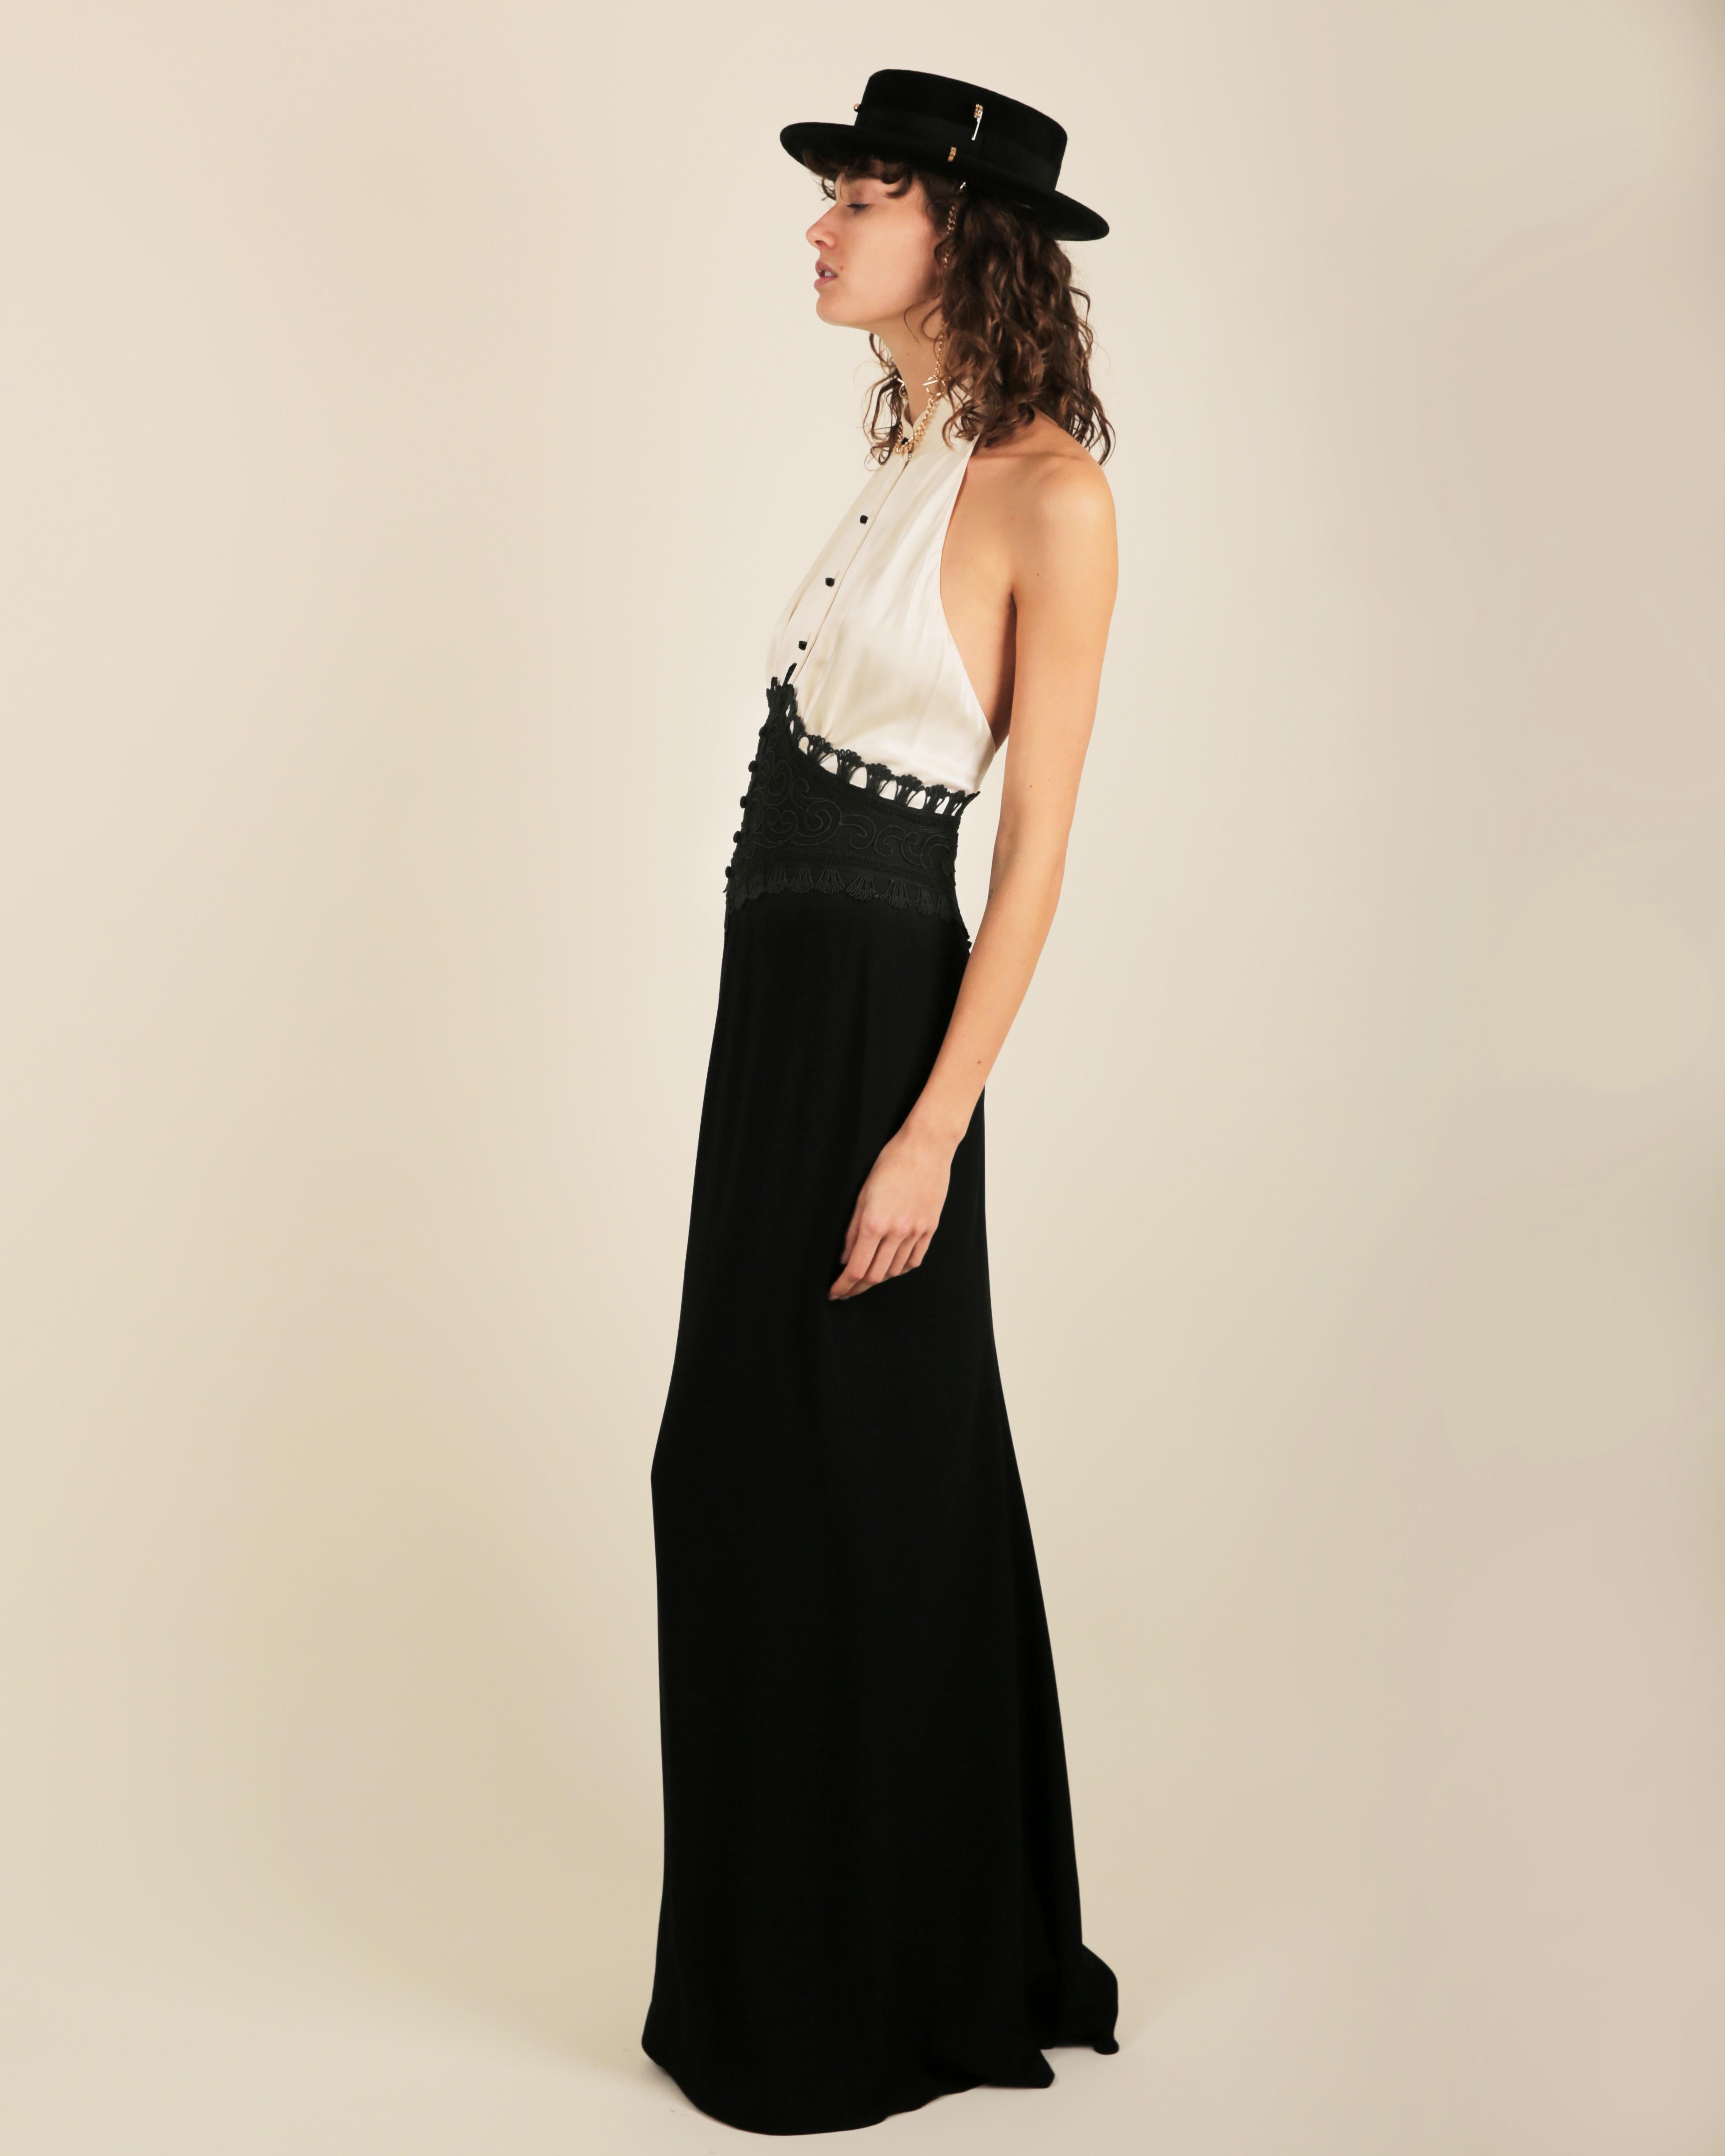 Ralph Lauren SS 2013 black white sleeveless halter backless button up dress gown In Excellent Condition For Sale In Paris, FR